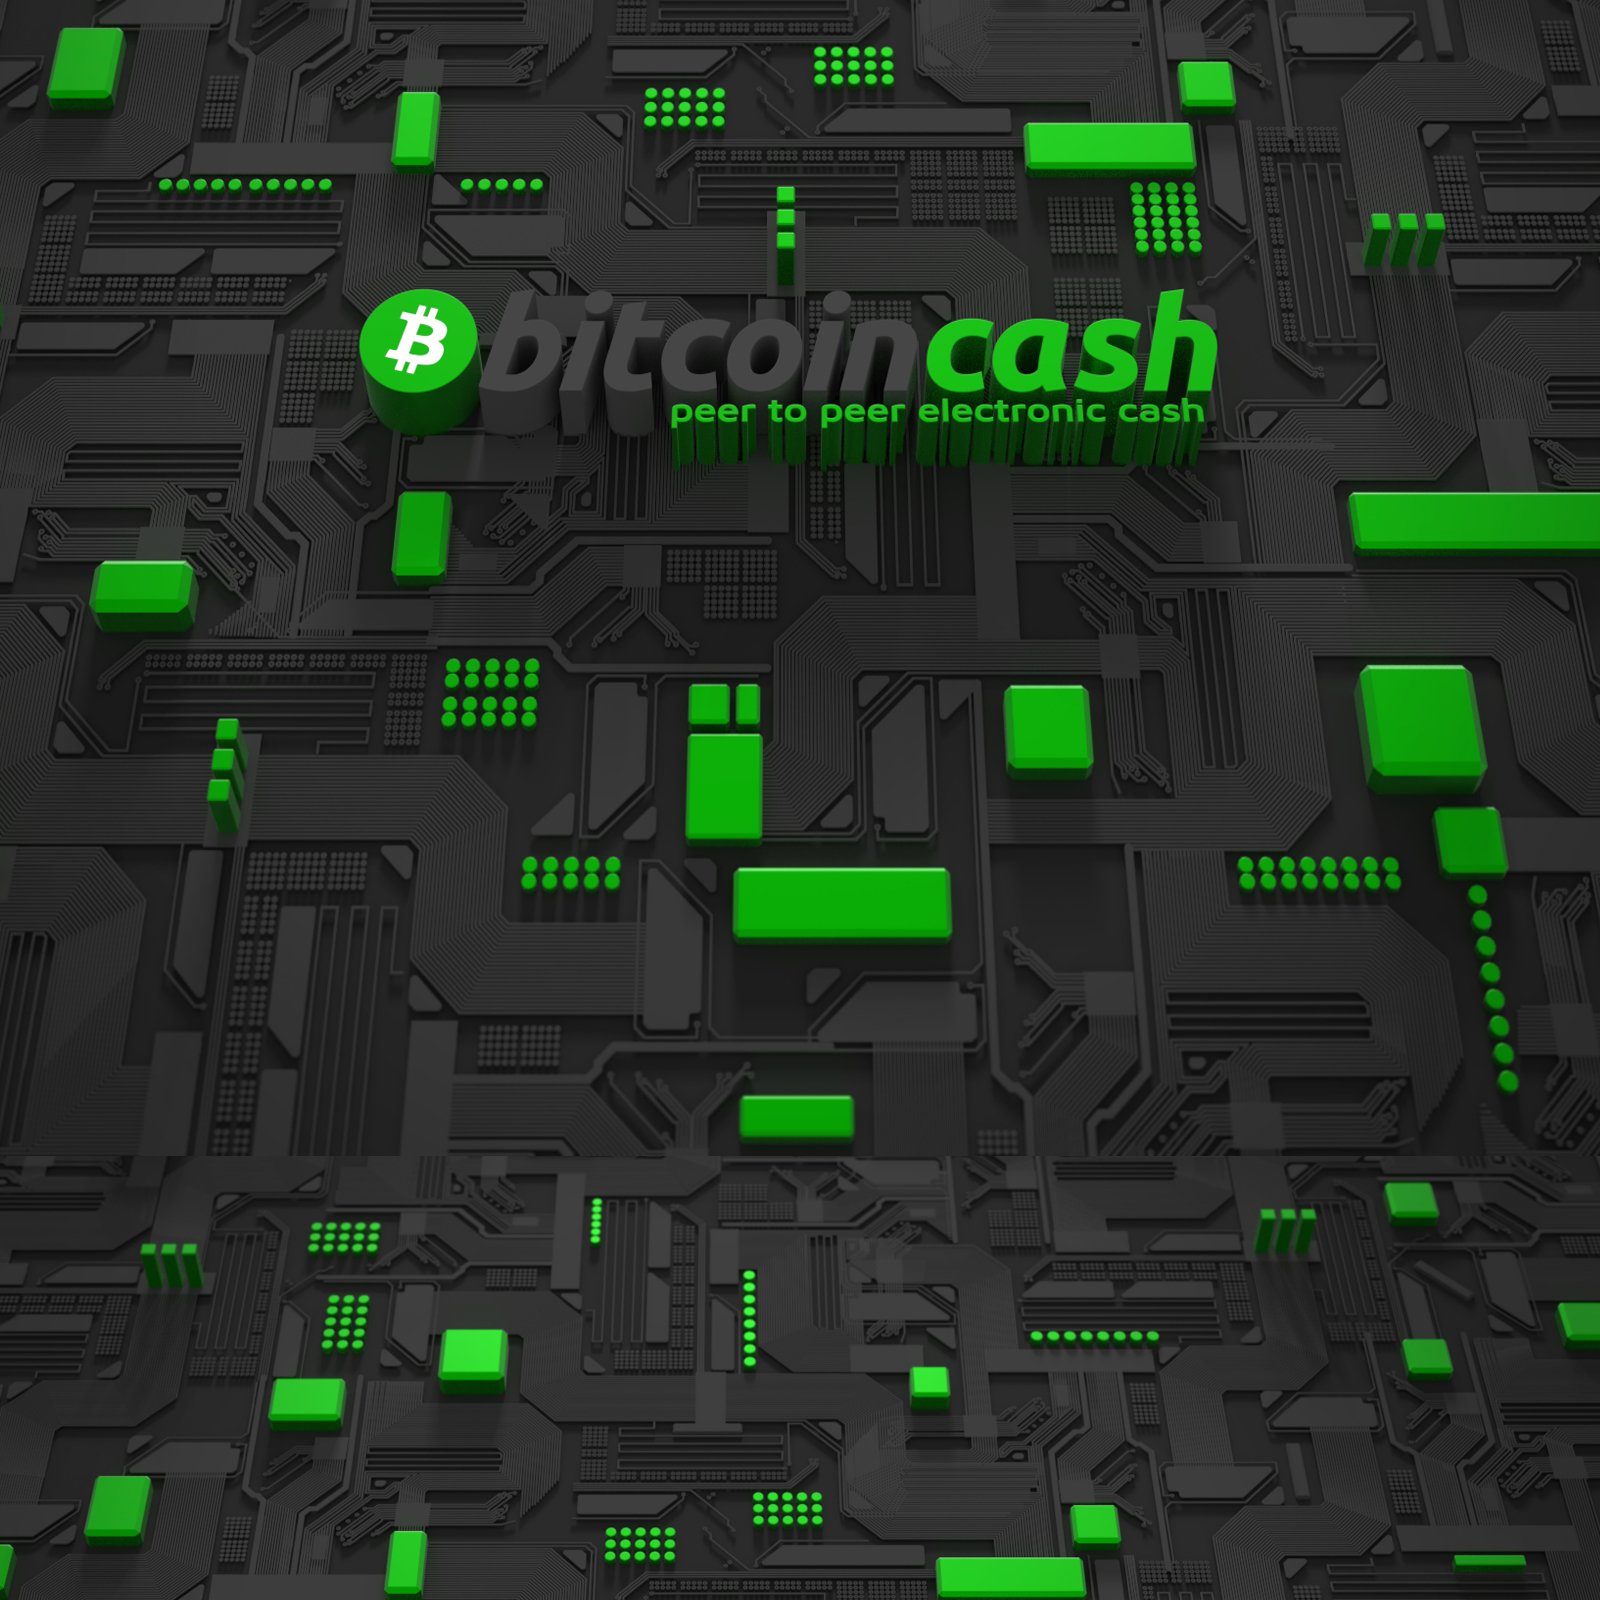 Bitcoin Cash Will Close Out 2017 With Significant Infrastructure Support